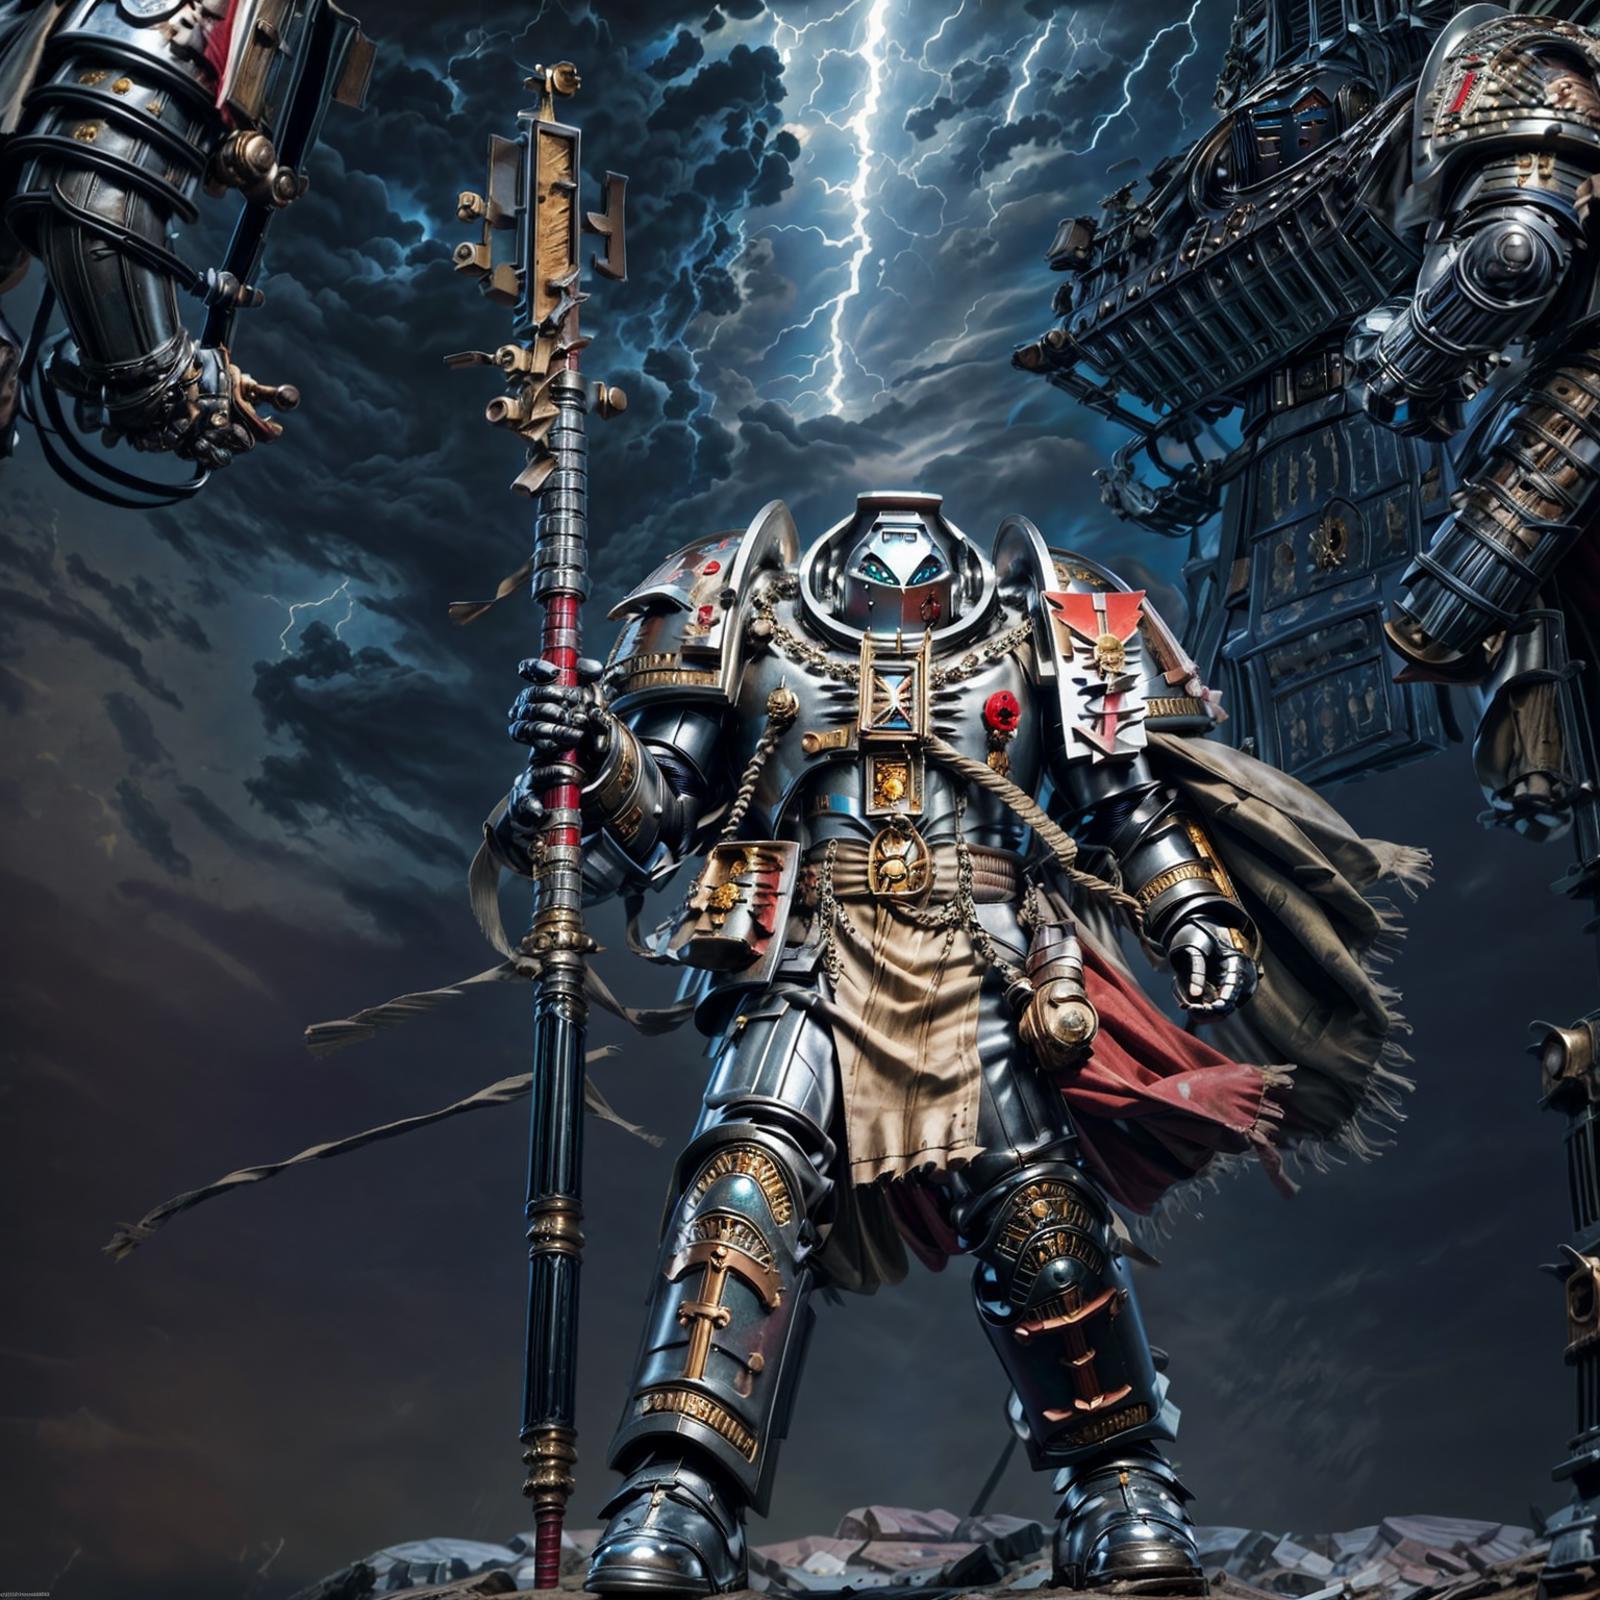 The Grey Knights image by Dercius